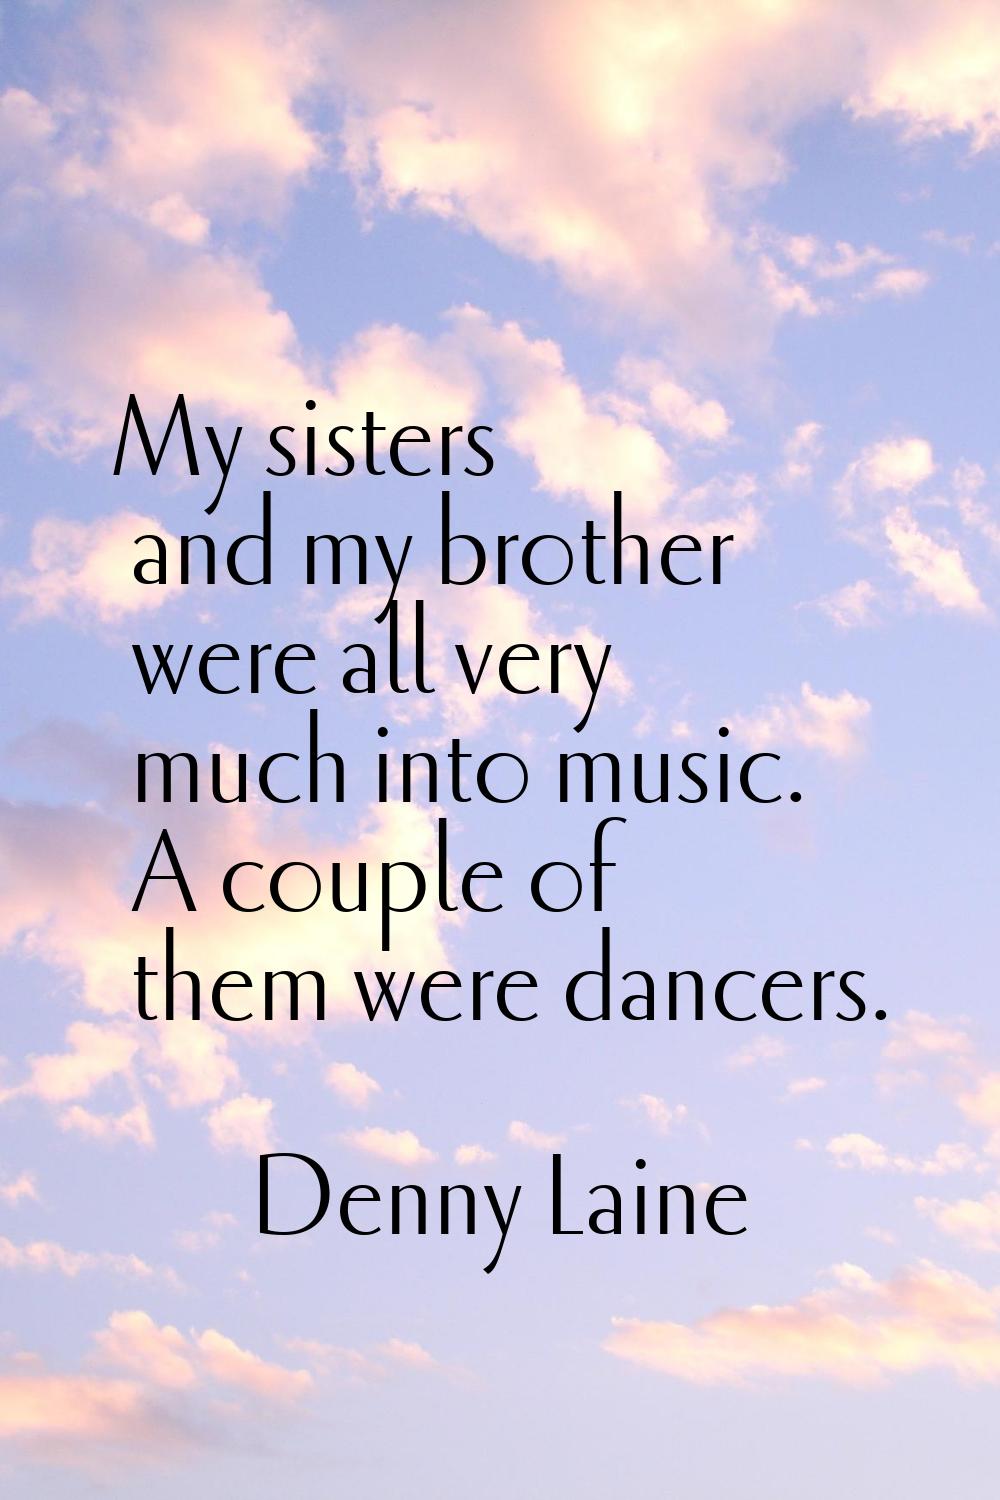 My sisters and my brother were all very much into music. A couple of them were dancers.